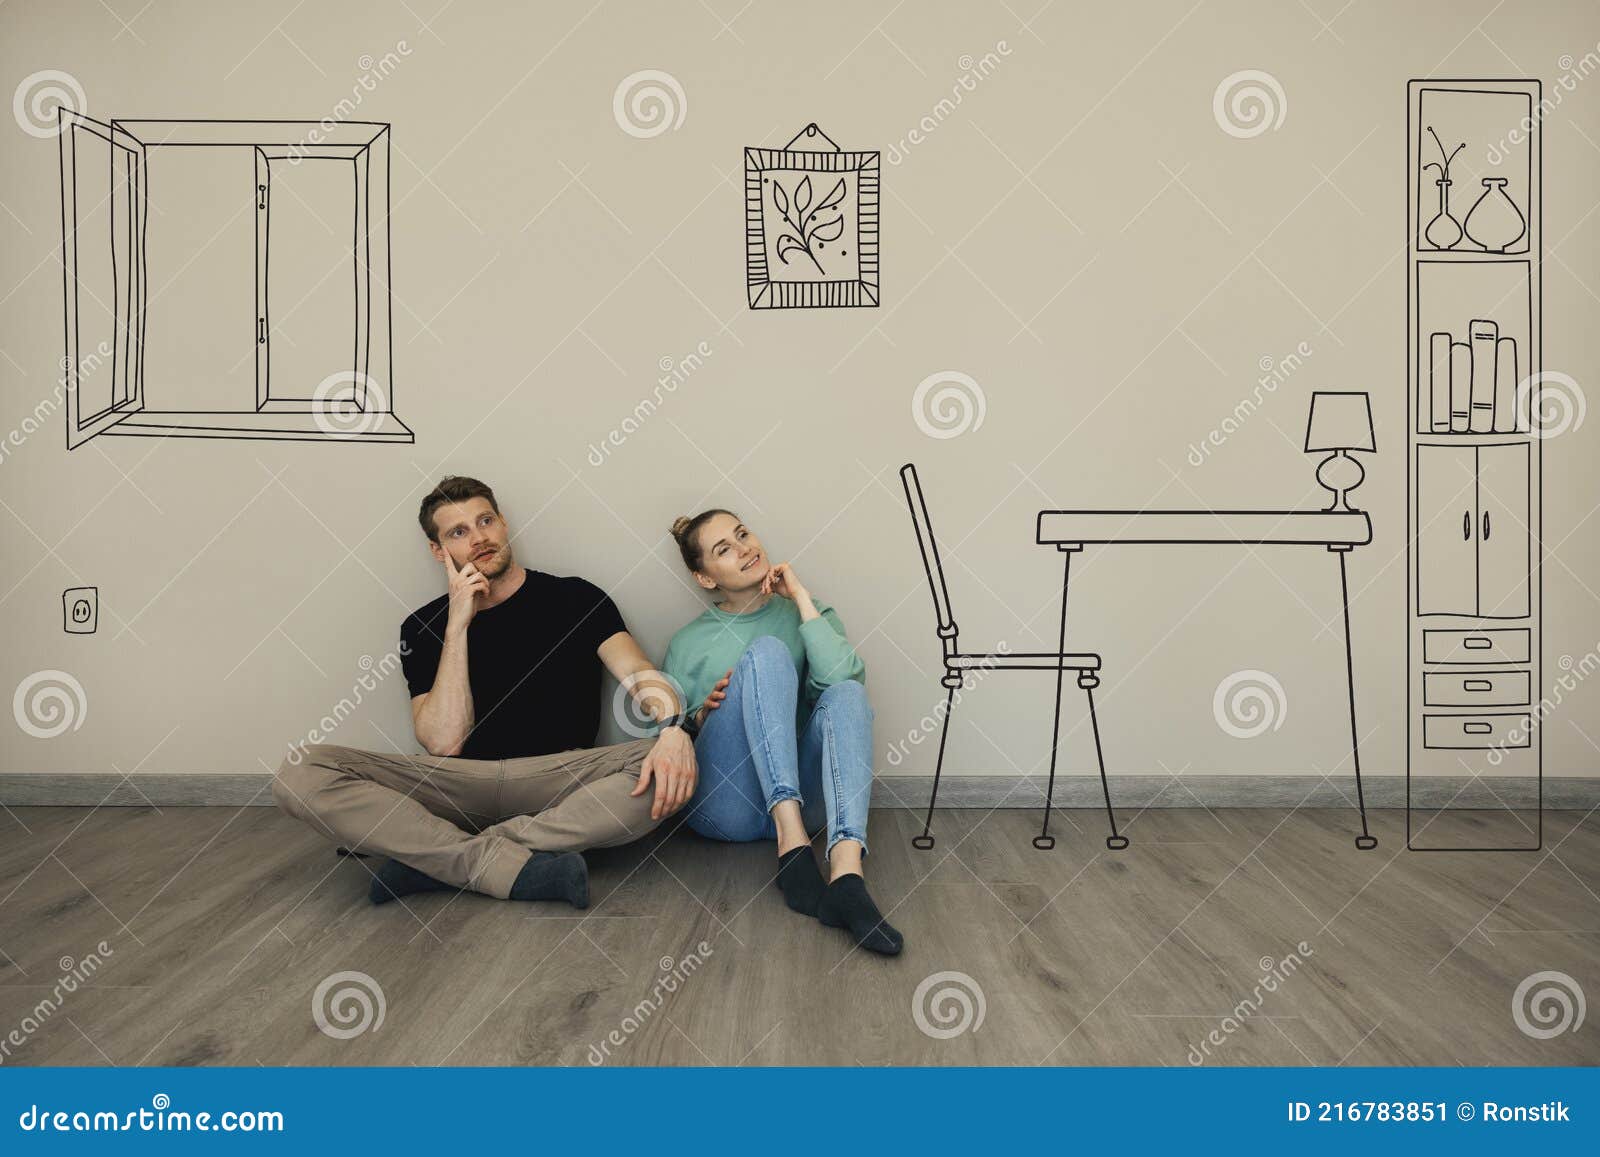 couple imagine interior of new house. sitting on floor and thinking in empty room